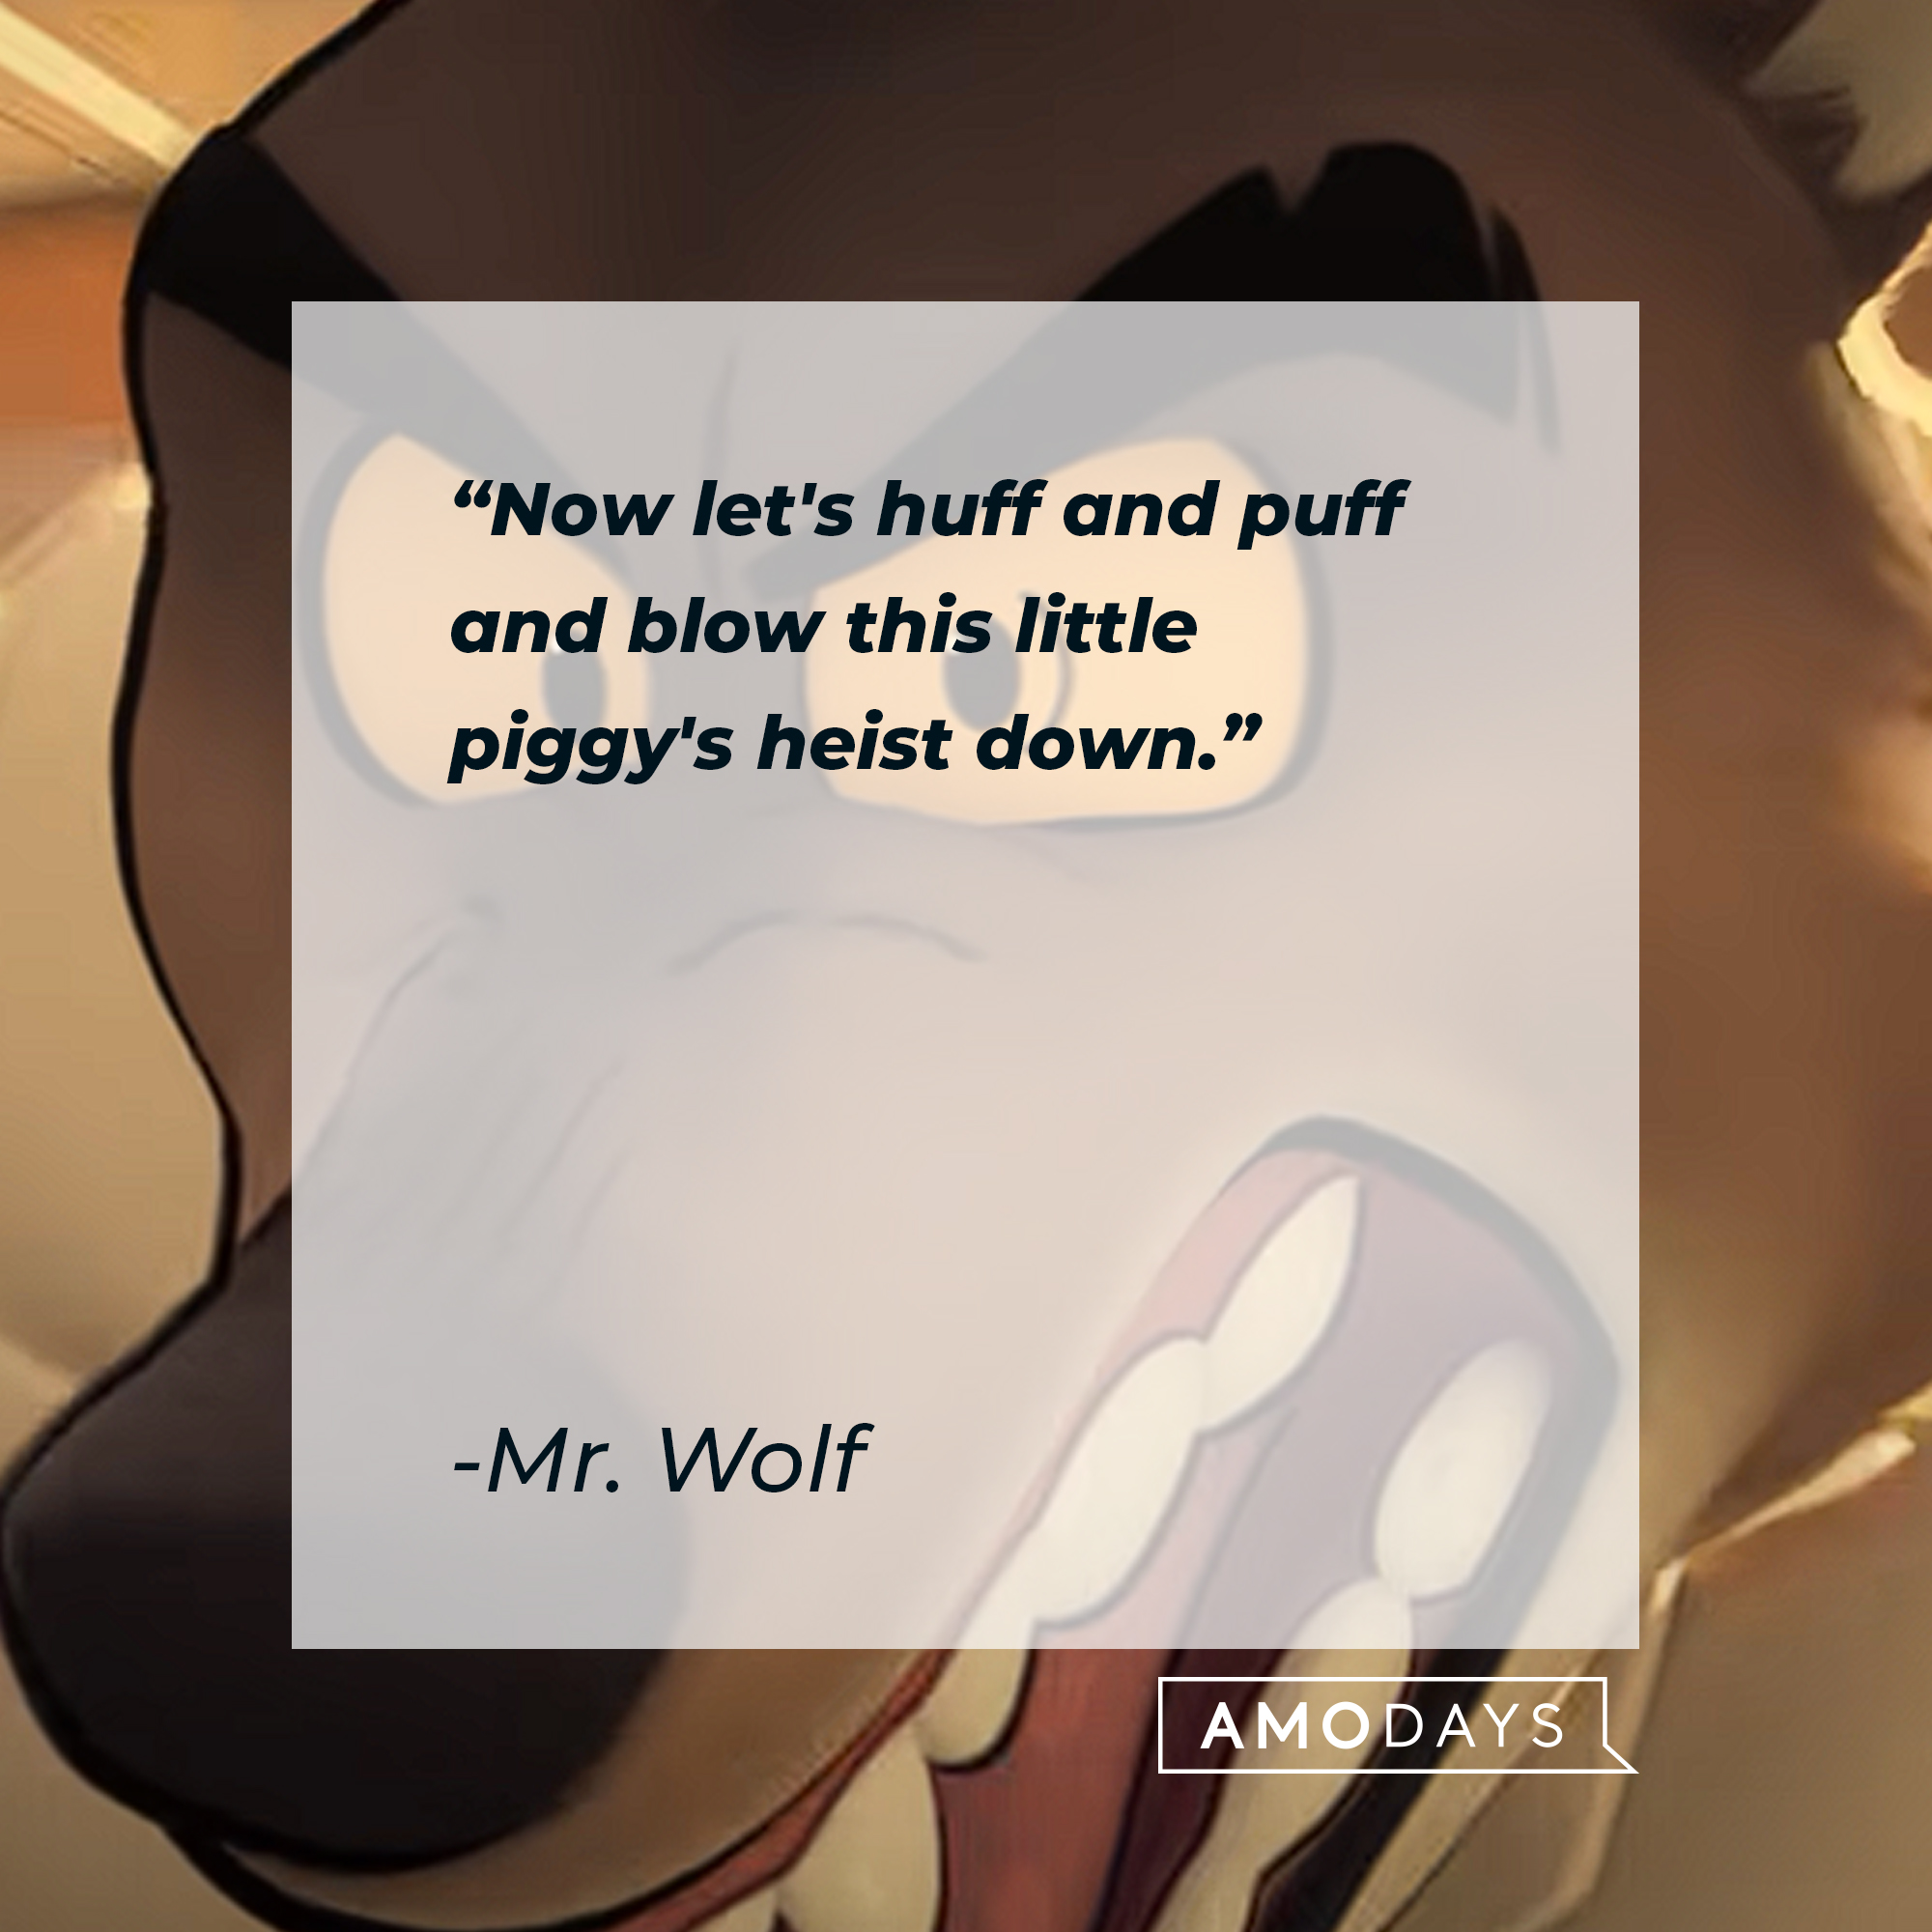 Mr. Wolf's quote: "Now let's huff and puff and blow this little piggy's heist down." | Source: youtube.com/Unive